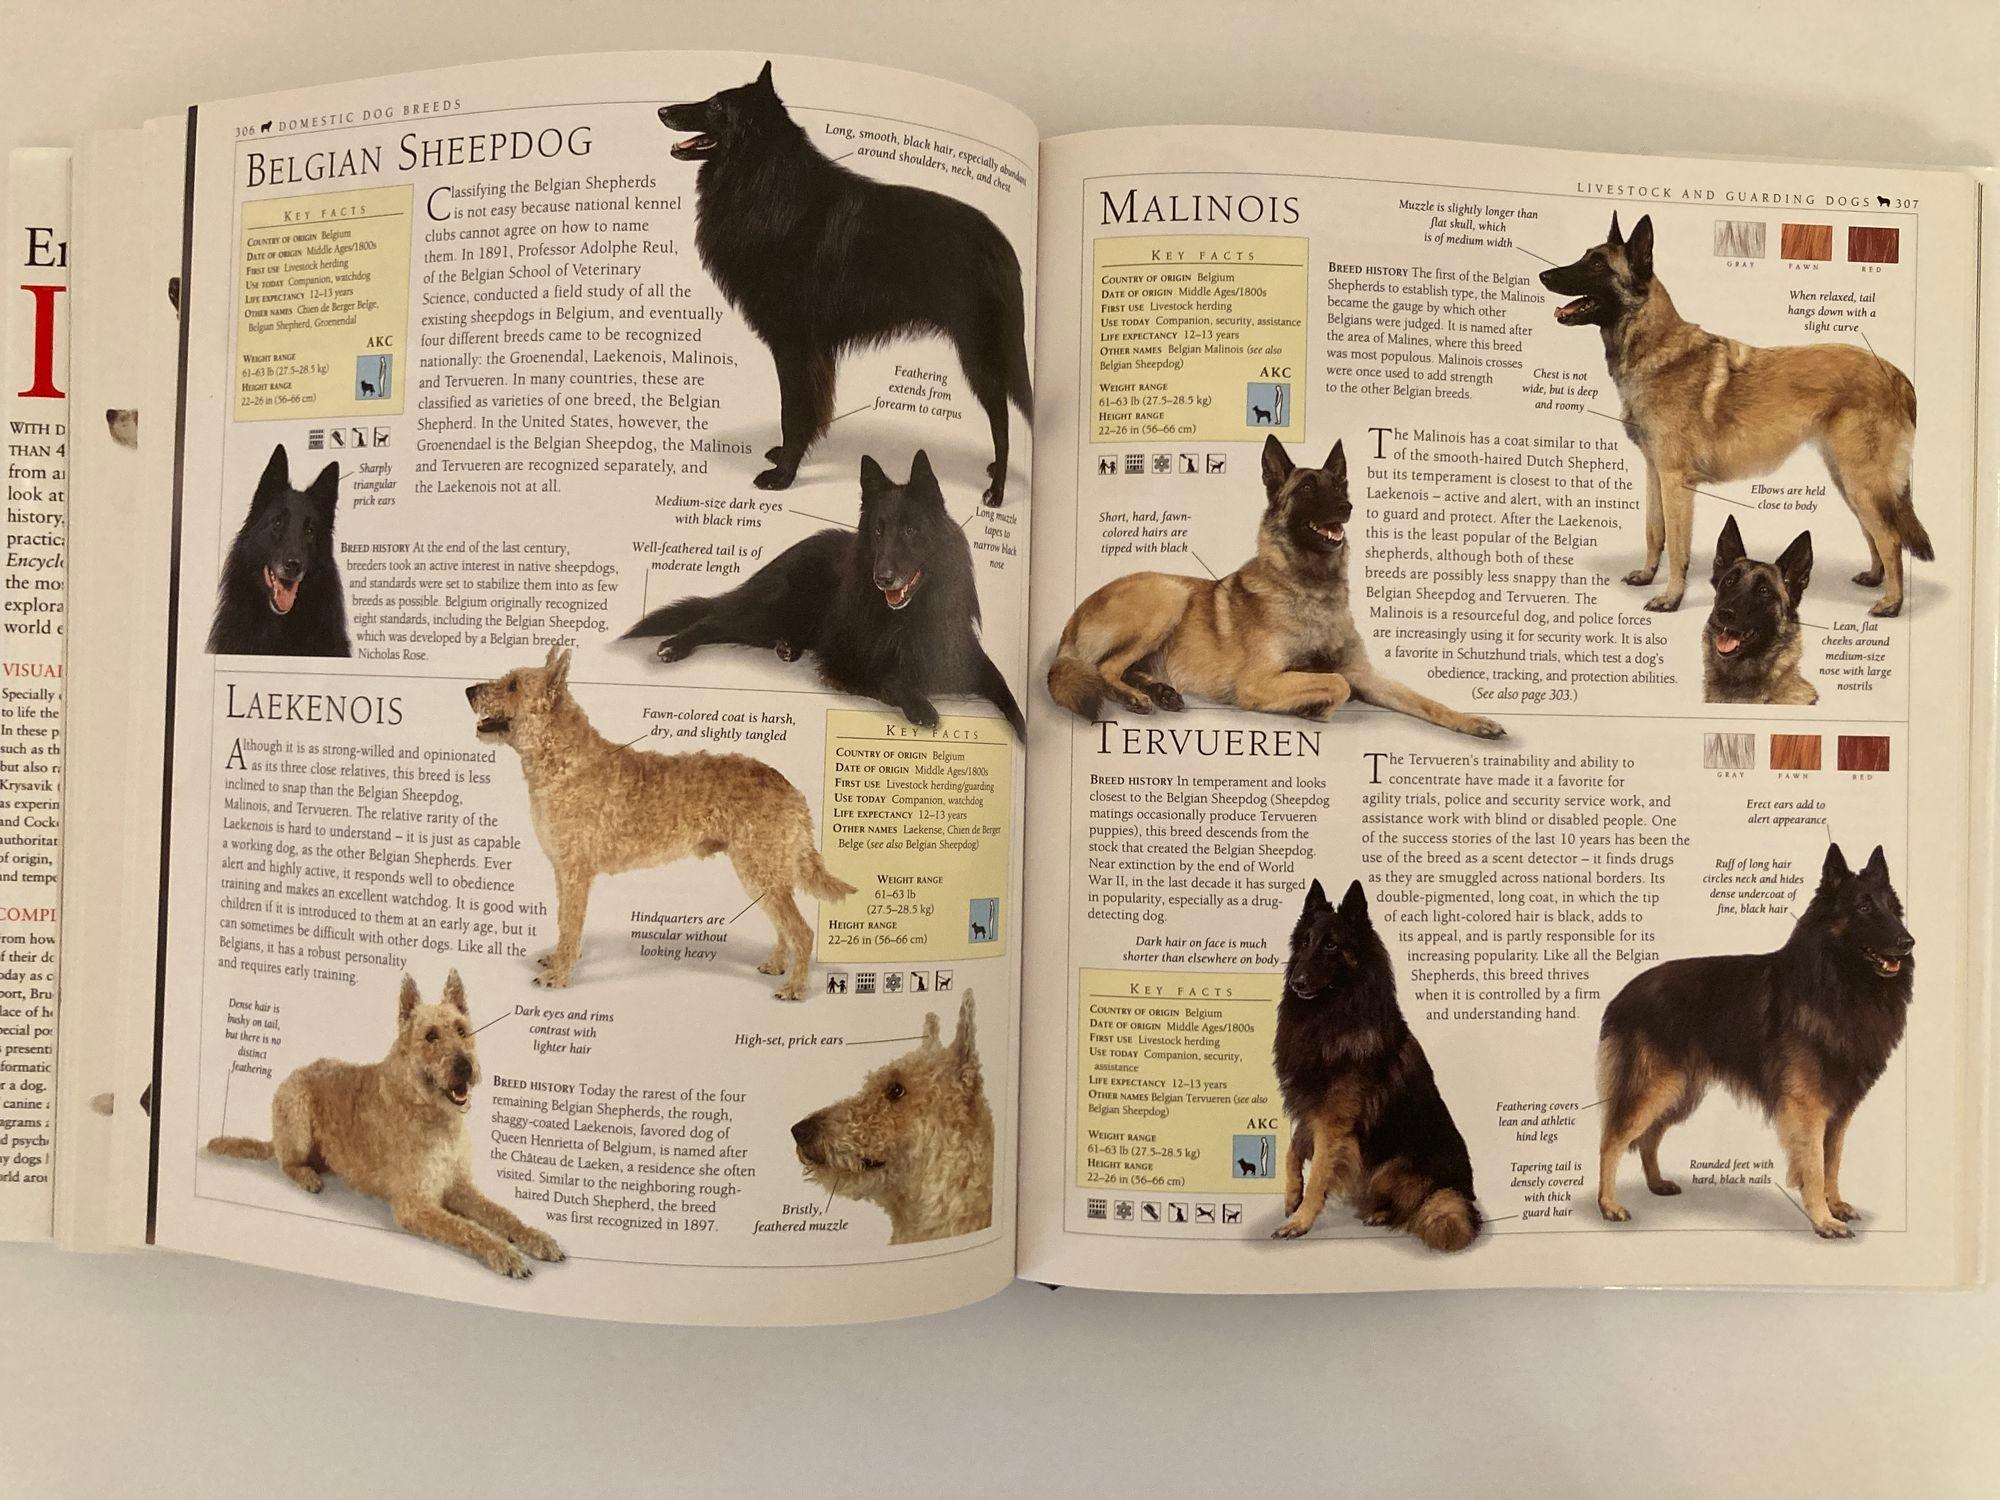 New Encyclopedia of Dog Hardcover Book by Bruce Fogle For Sale 7